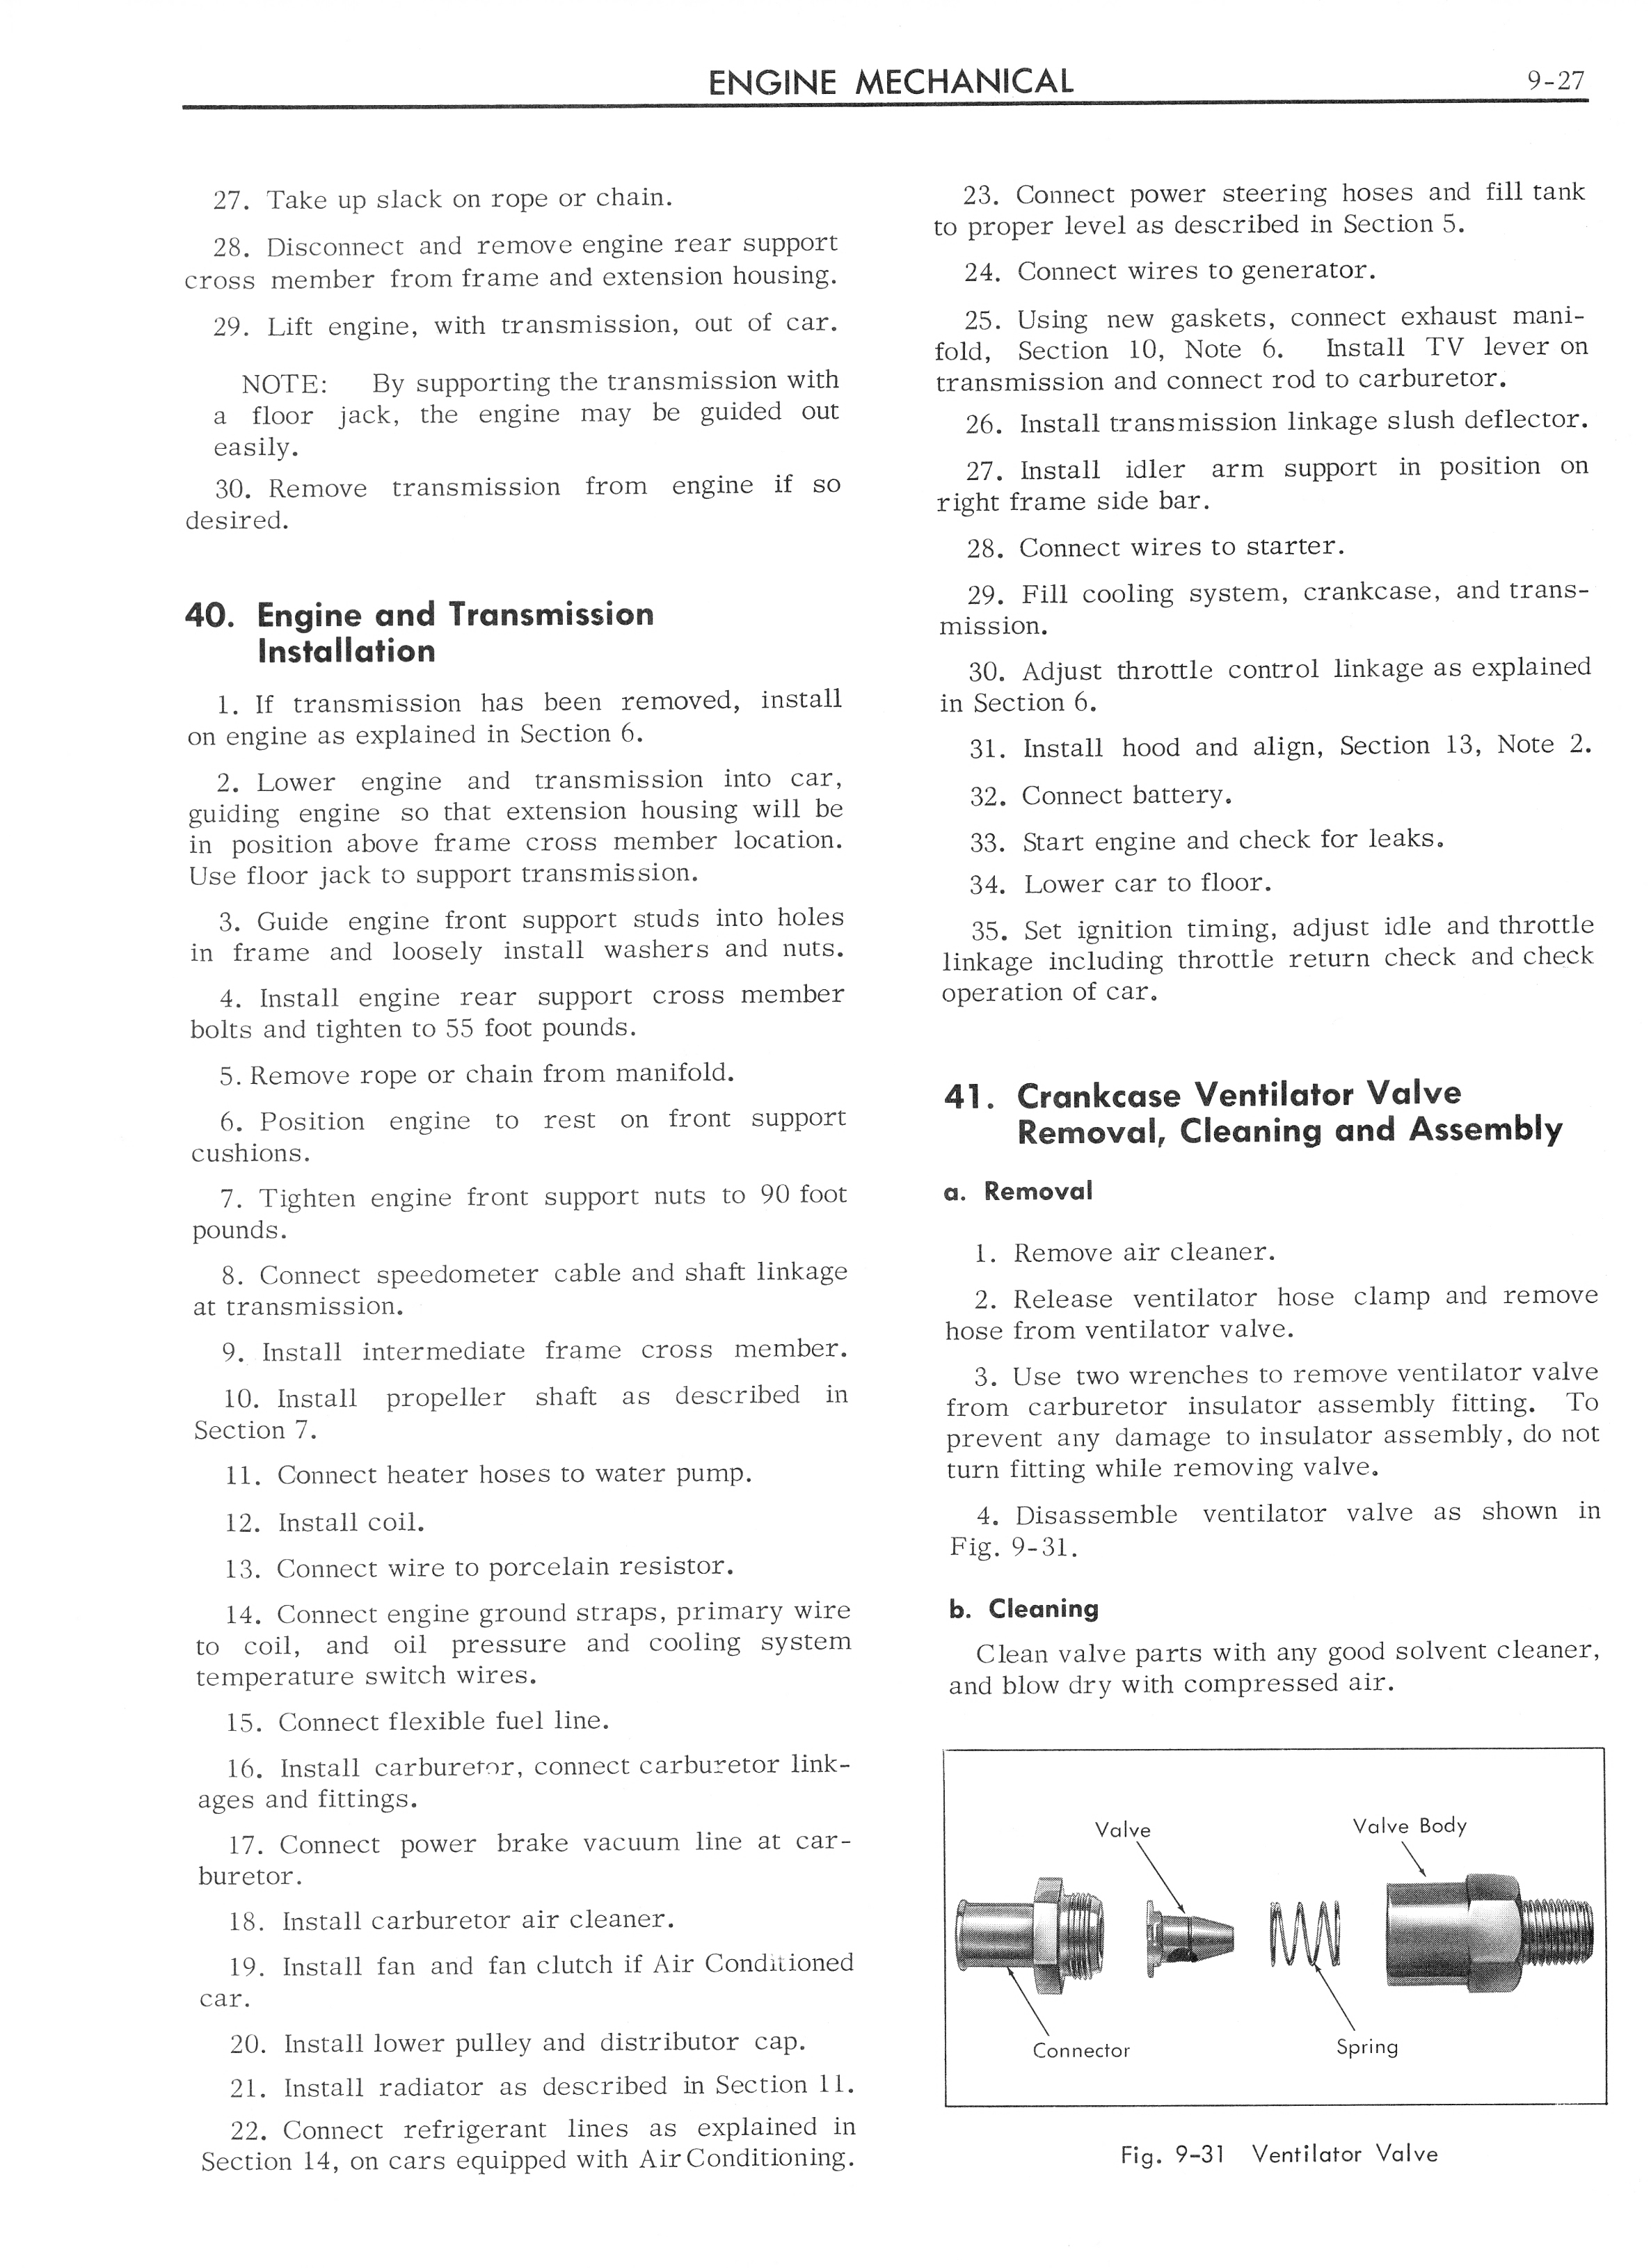 1962 Cadillac Shop Manual - Engine Mechanical Page 27 of 32